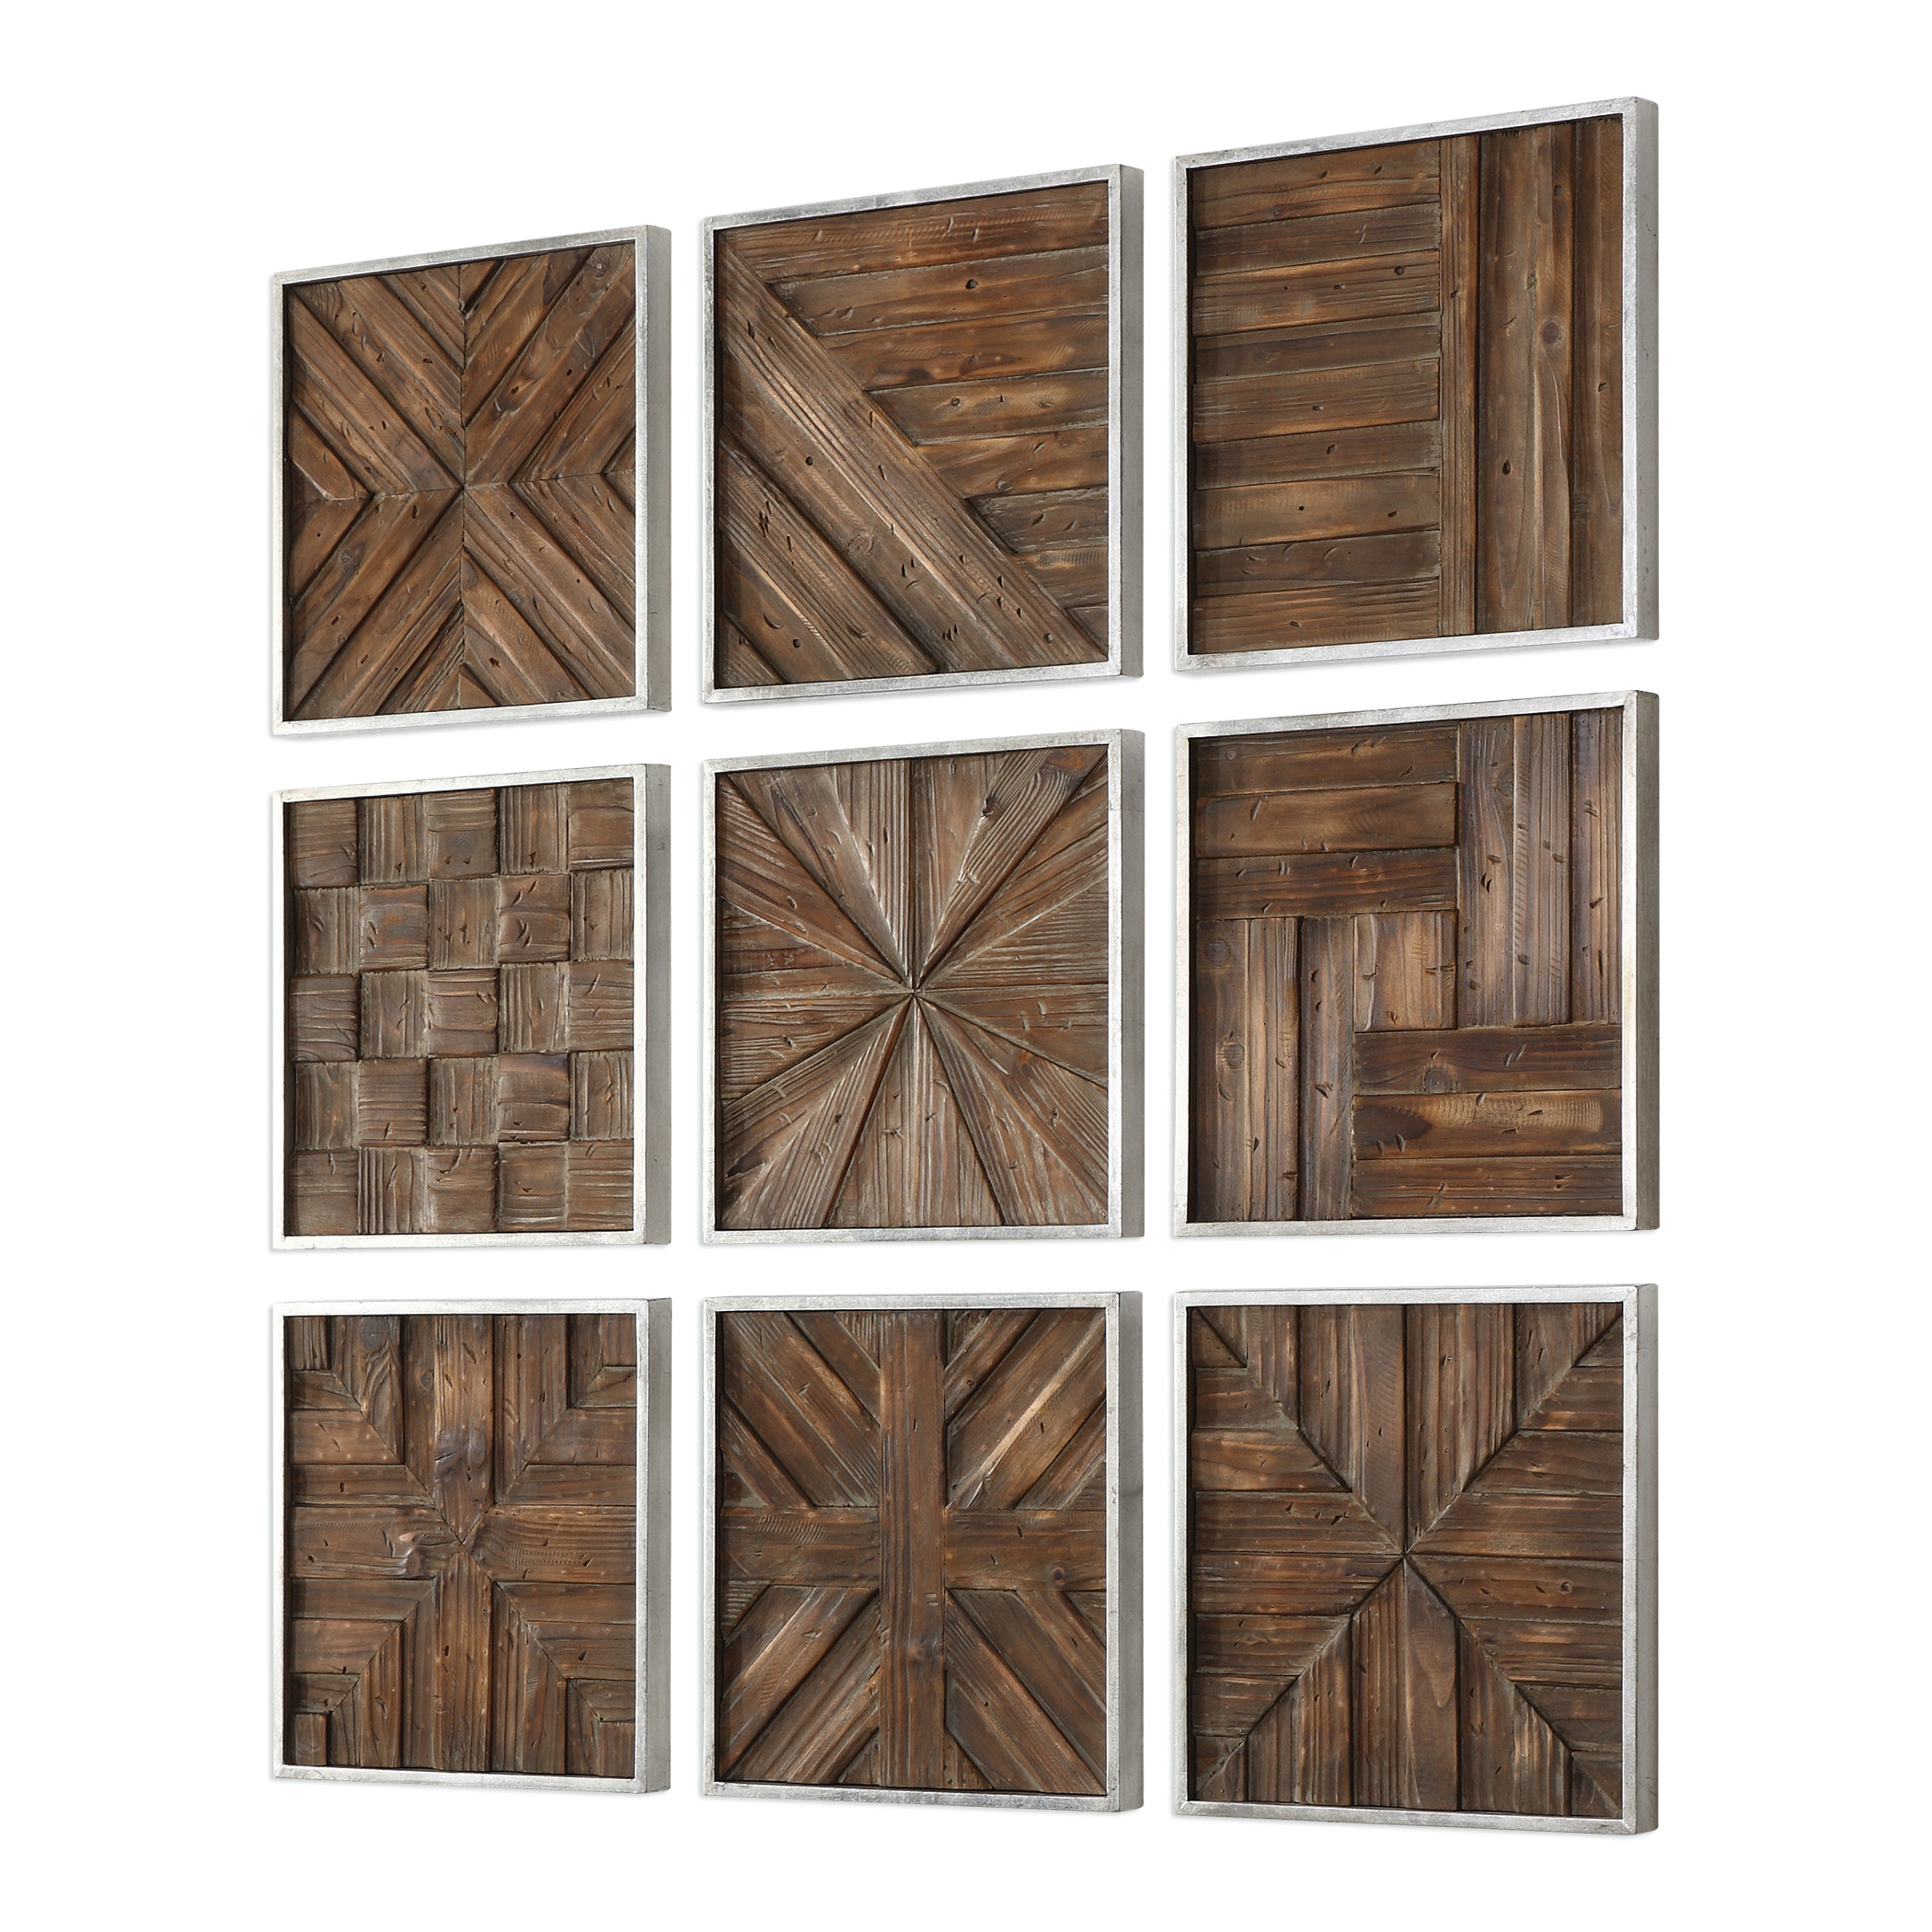 Bryndle Rustic Wooden Squares, Set of 9 - Image 2